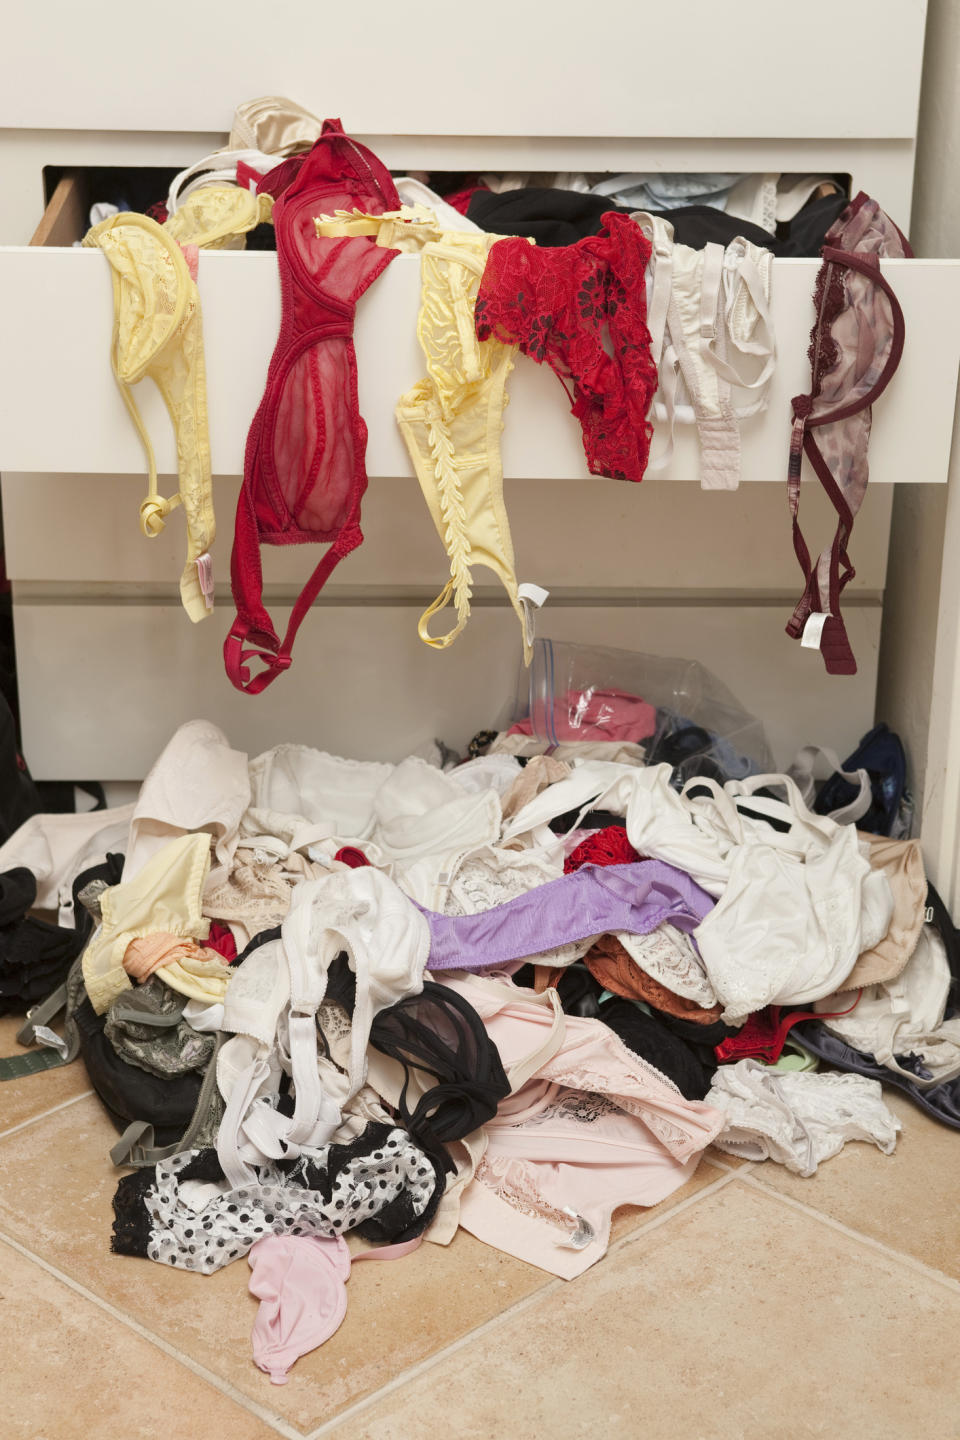 There's a 'dirty little secret' hidden in Aussie womens' underwear drawers. Photo: Getty Images.